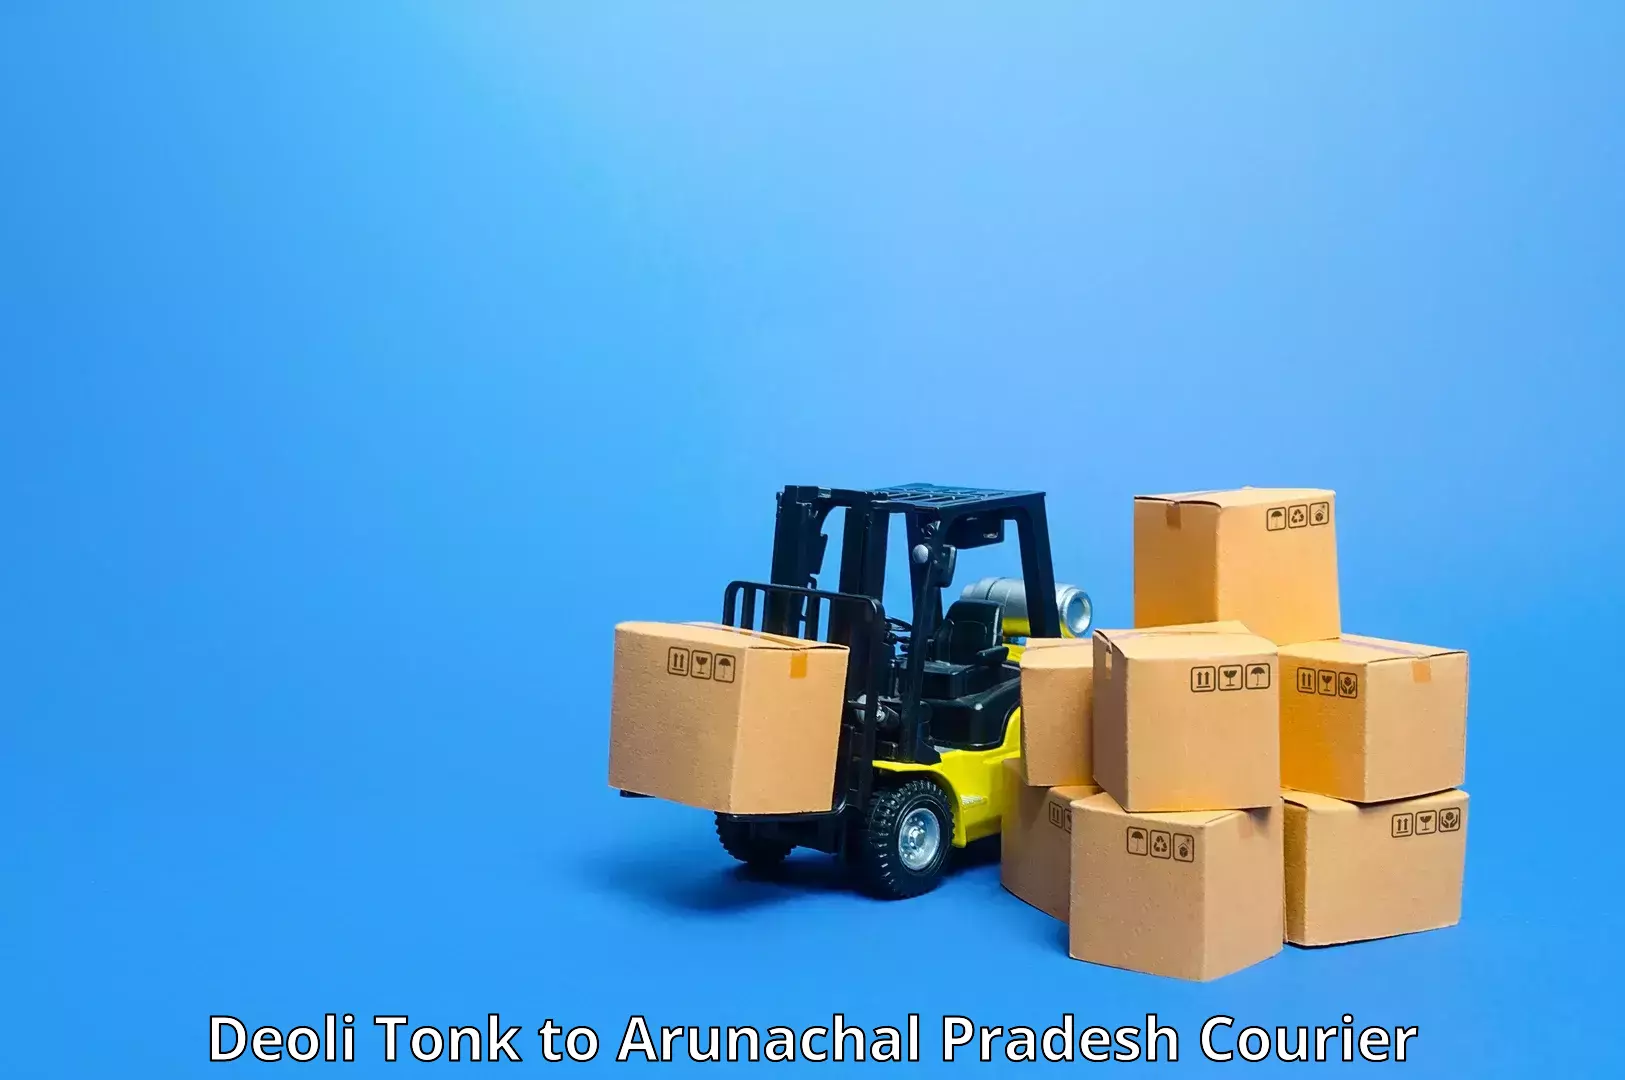 High-capacity courier solutions Deoli Tonk to Dibang Valley